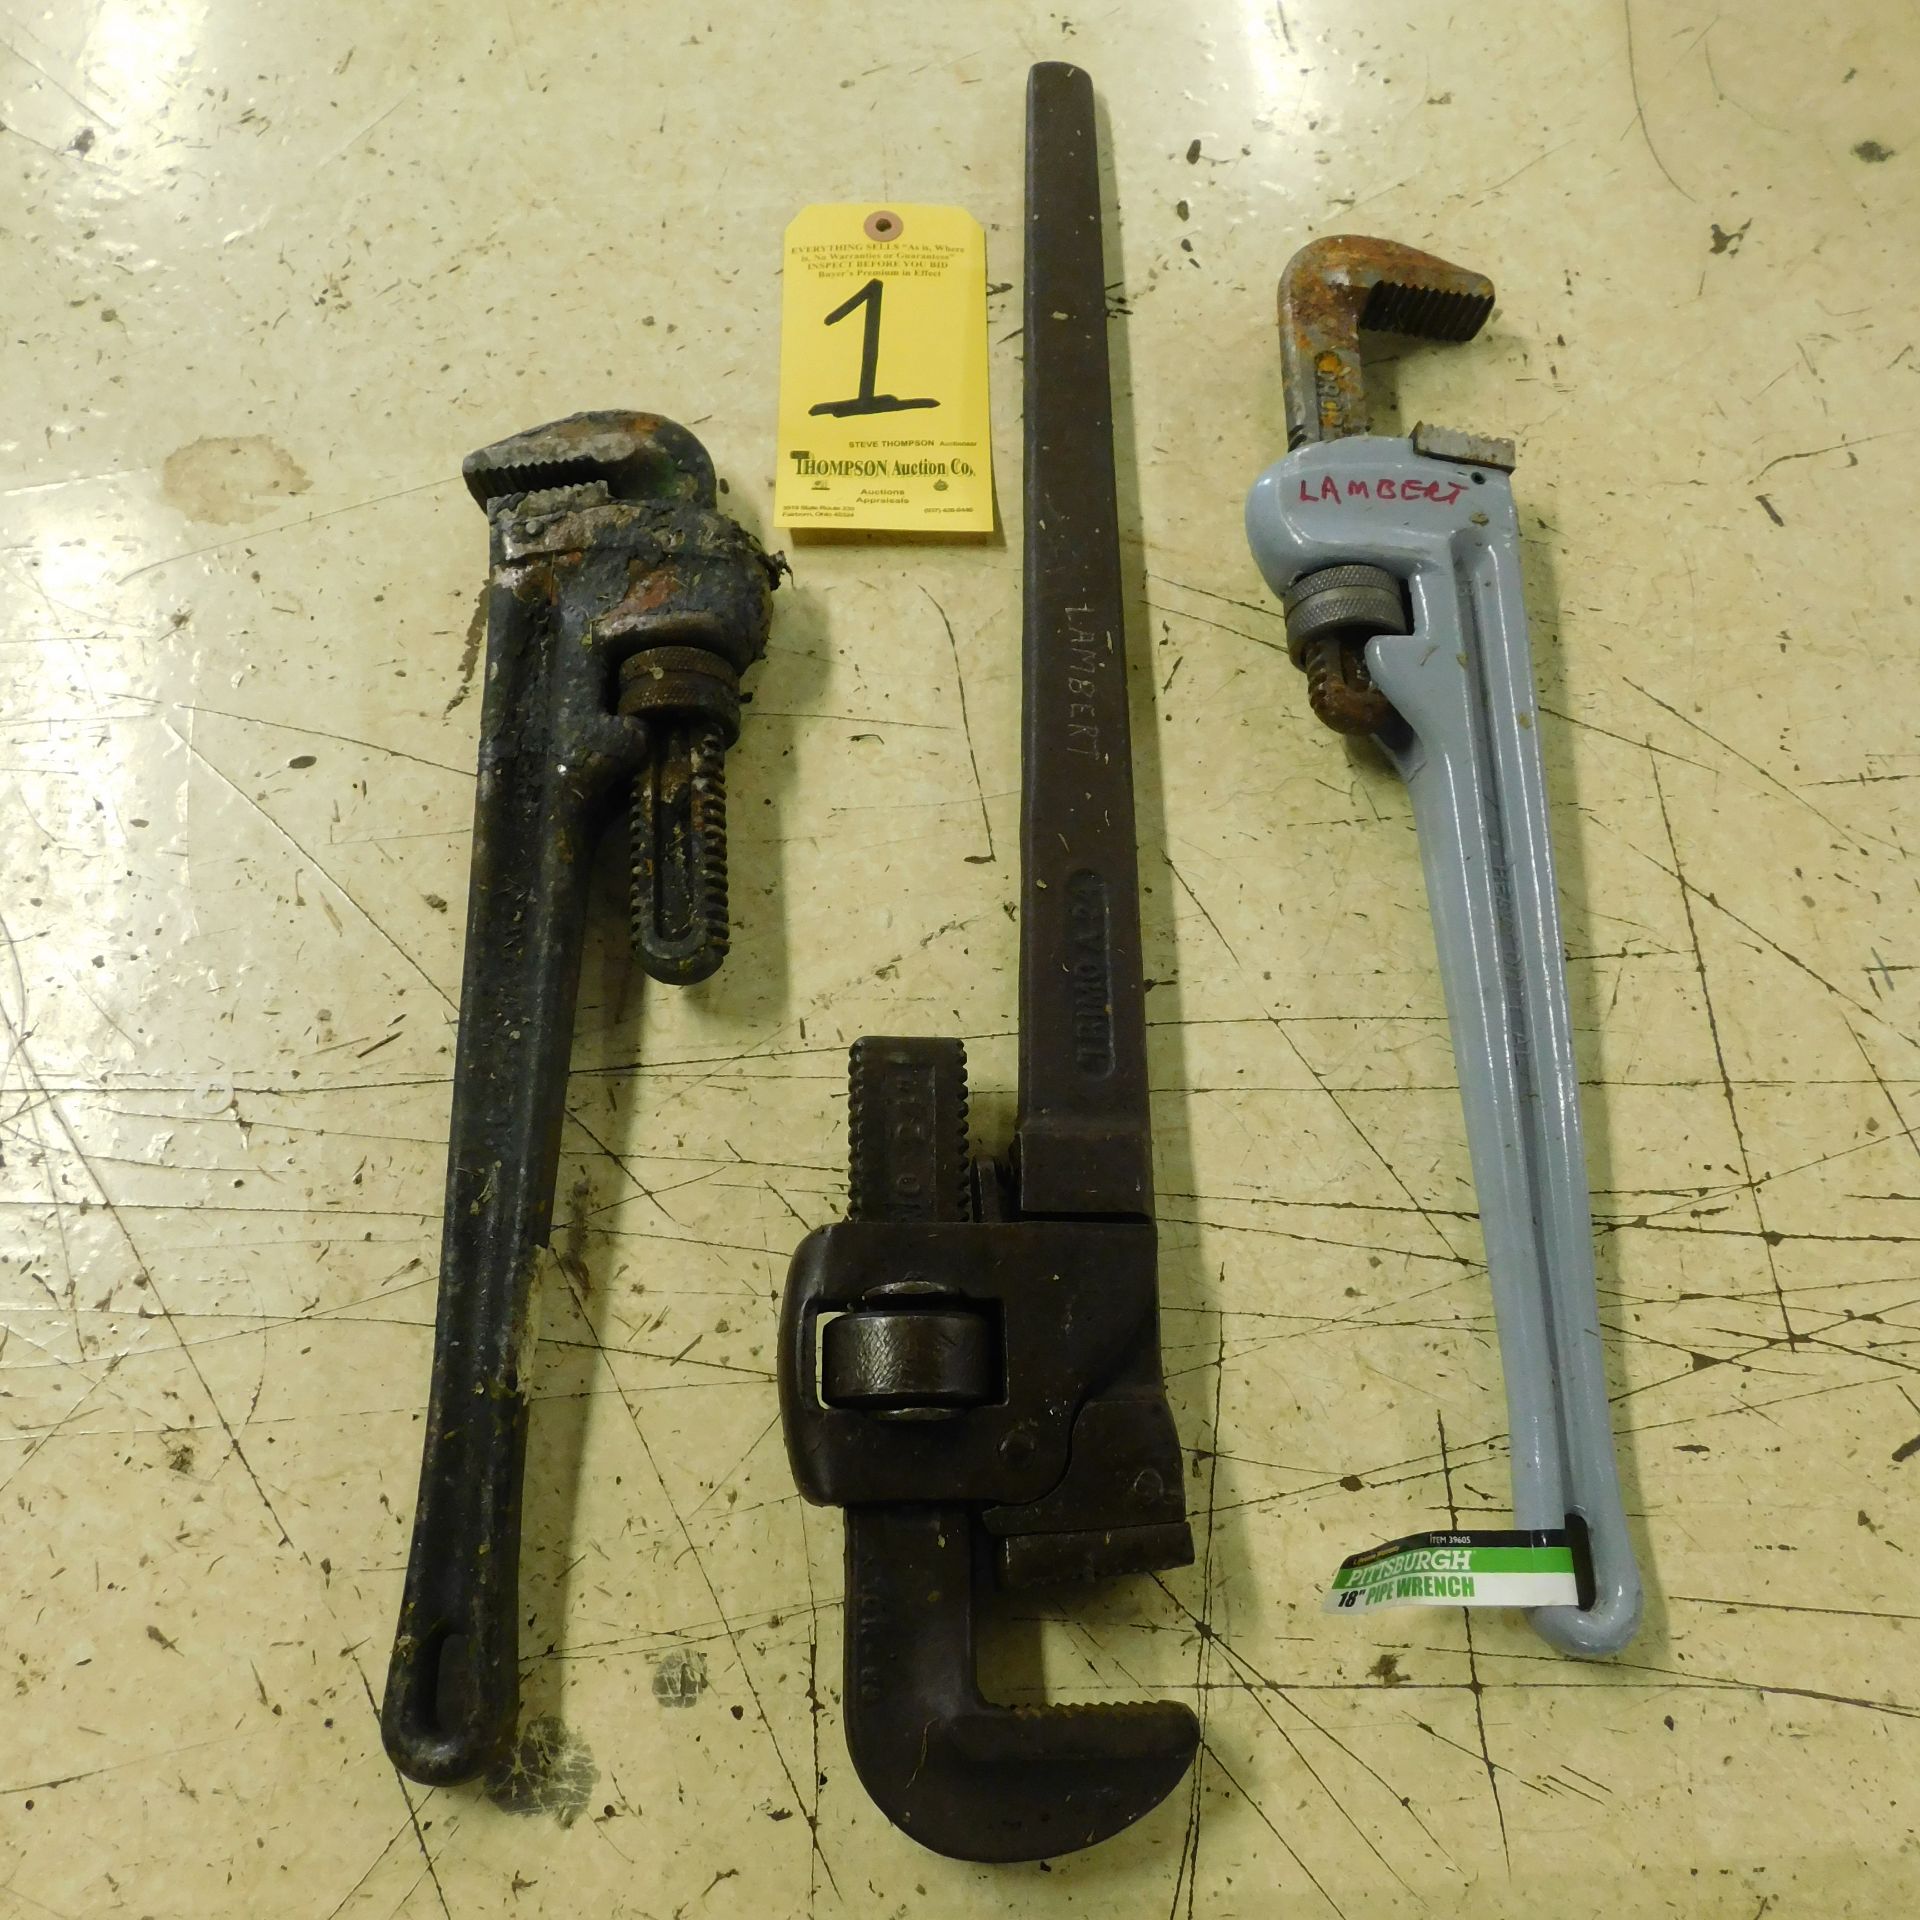 (3) Pipe Wrenches, Lot Location 117 S. Third St., Ansonia, Ohio